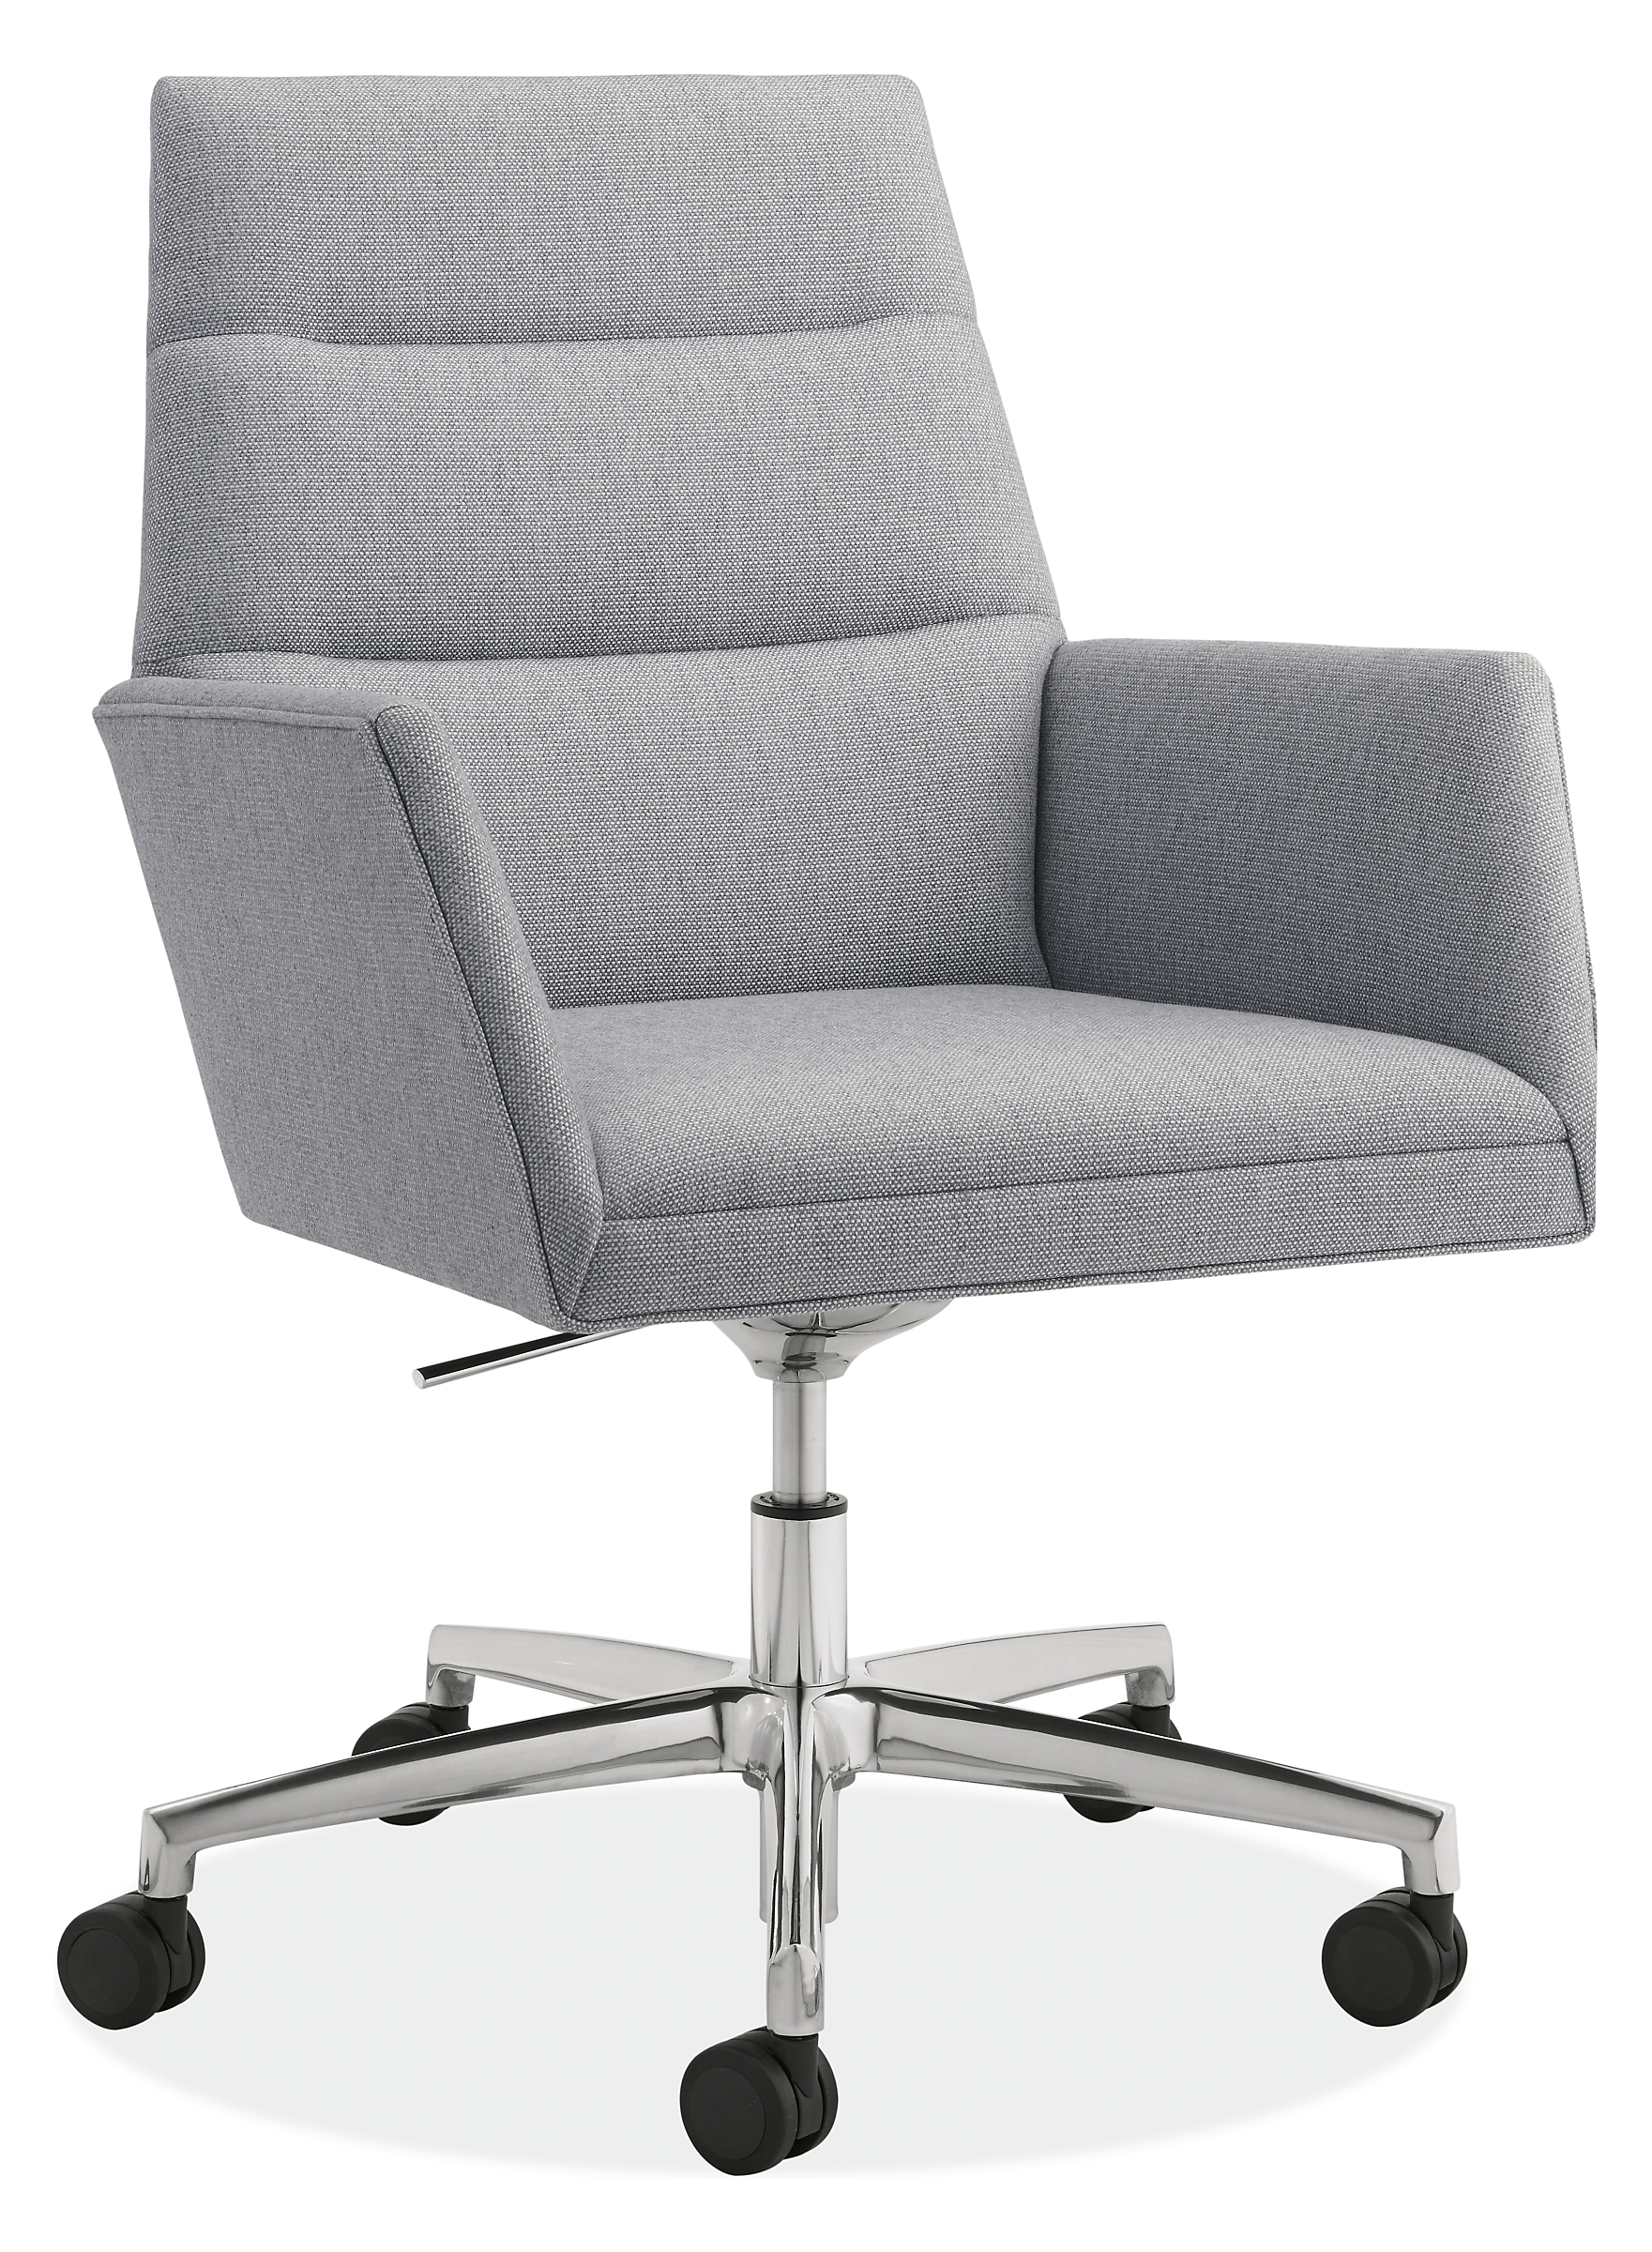 Angled view of Tenley Office Chair in Mila Grey.